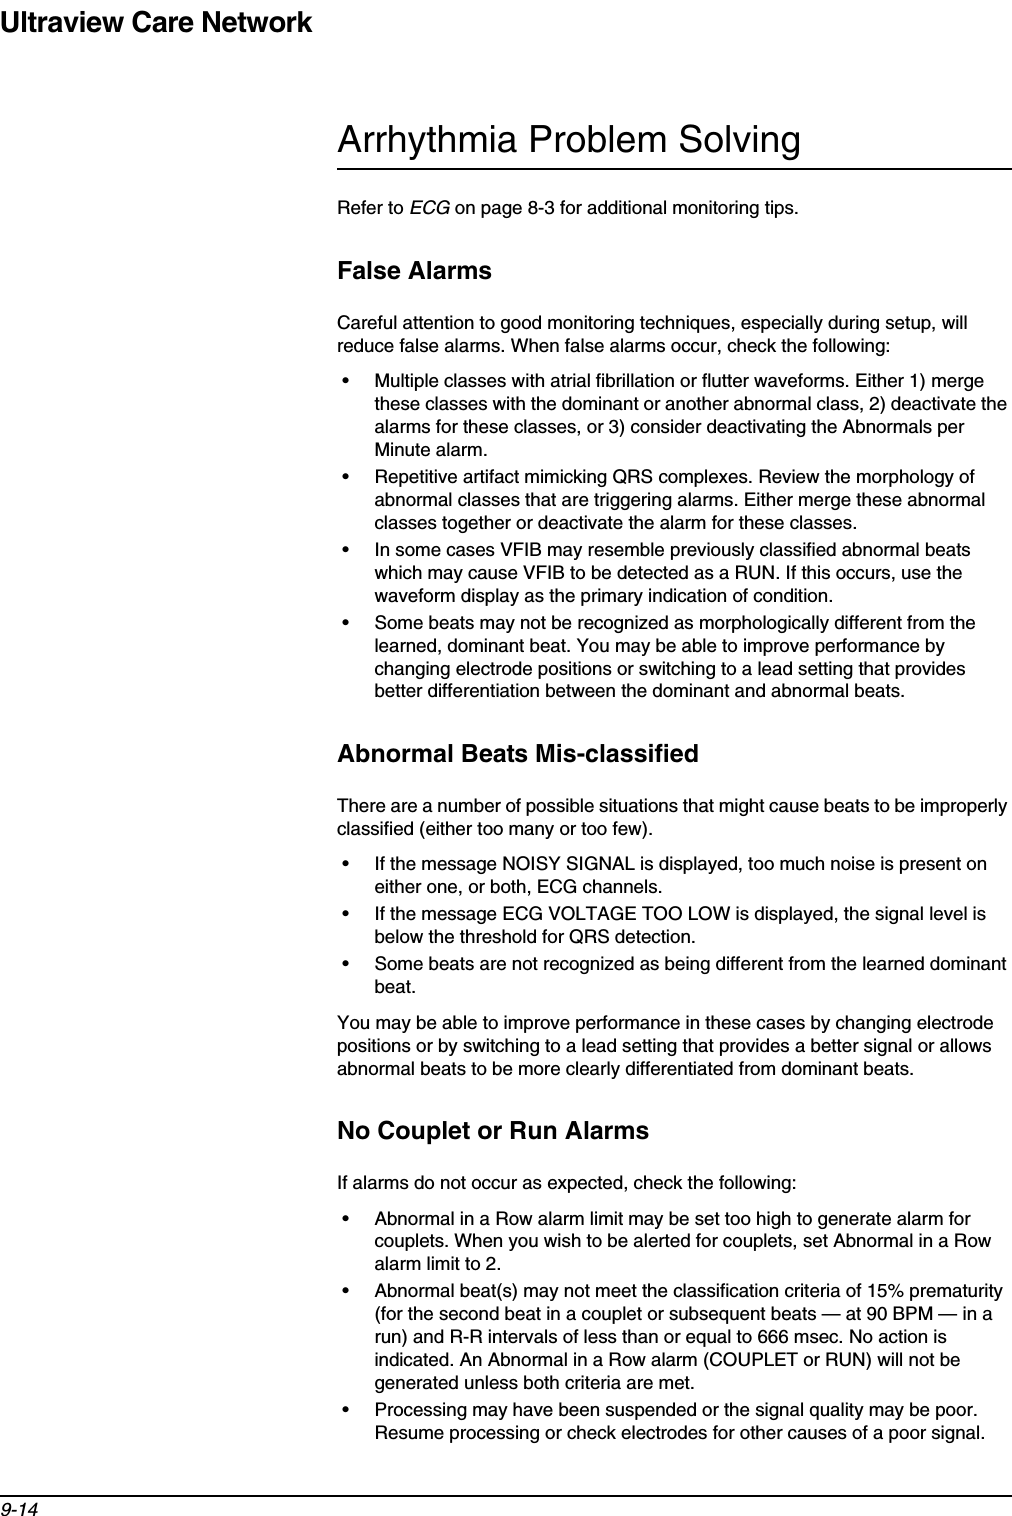 Ultraview Care Network9-14Arrhythmia Problem SolvingRefer to ECG on page 8-3 for additional monitoring tips.False AlarmsCareful attention to good monitoring techniques, especially during setup, will reduce false alarms. When false alarms occur, check the following:• Multiple classes with atrial fibrillation or flutter waveforms. Either 1) merge these classes with the dominant or another abnormal class, 2) deactivate the alarms for these classes, or 3) consider deactivating the Abnormals per Minute alarm.• Repetitive artifact mimicking QRS complexes. Review the morphology of abnormal classes that are triggering alarms. Either merge these abnormal classes together or deactivate the alarm for these classes.• In some cases VFIB may resemble previously classified abnormal beats which may cause VFIB to be detected as a RUN. If this occurs, use the waveform display as the primary indication of condition.• Some beats may not be recognized as morphologically different from the learned, dominant beat. You may be able to improve performance by changing electrode positions or switching to a lead setting that provides better differentiation between the dominant and abnormal beats.Abnormal Beats Mis-classifiedThere are a number of possible situations that might cause beats to be improperly classified (either too many or too few).• If the message NOISY SIGNAL is displayed, too much noise is present on either one, or both, ECG channels.• If the message ECG VOLTAGE TOO LOW is displayed, the signal level is below the threshold for QRS detection.• Some beats are not recognized as being different from the learned dominant beat.You may be able to improve performance in these cases by changing electrode positions or by switching to a lead setting that provides a better signal or allows abnormal beats to be more clearly differentiated from dominant beats.No Couplet or Run AlarmsIf alarms do not occur as expected, check the following:• Abnormal in a Row alarm limit may be set too high to generate alarm for couplets. When you wish to be alerted for couplets, set Abnormal in a Row alarm limit to 2.• Abnormal beat(s) may not meet the classification criteria of 15% prematurity (for the second beat in a couplet or subsequent beats — at 90 BPM — in a run) and R-R intervals of less than or equal to 666 msec. No action is indicated. An Abnormal in a Row alarm (COUPLET or RUN) will not be generated unless both criteria are met.• Processing may have been suspended or the signal quality may be poor. Resume processing or check electrodes for other causes of a poor signal.